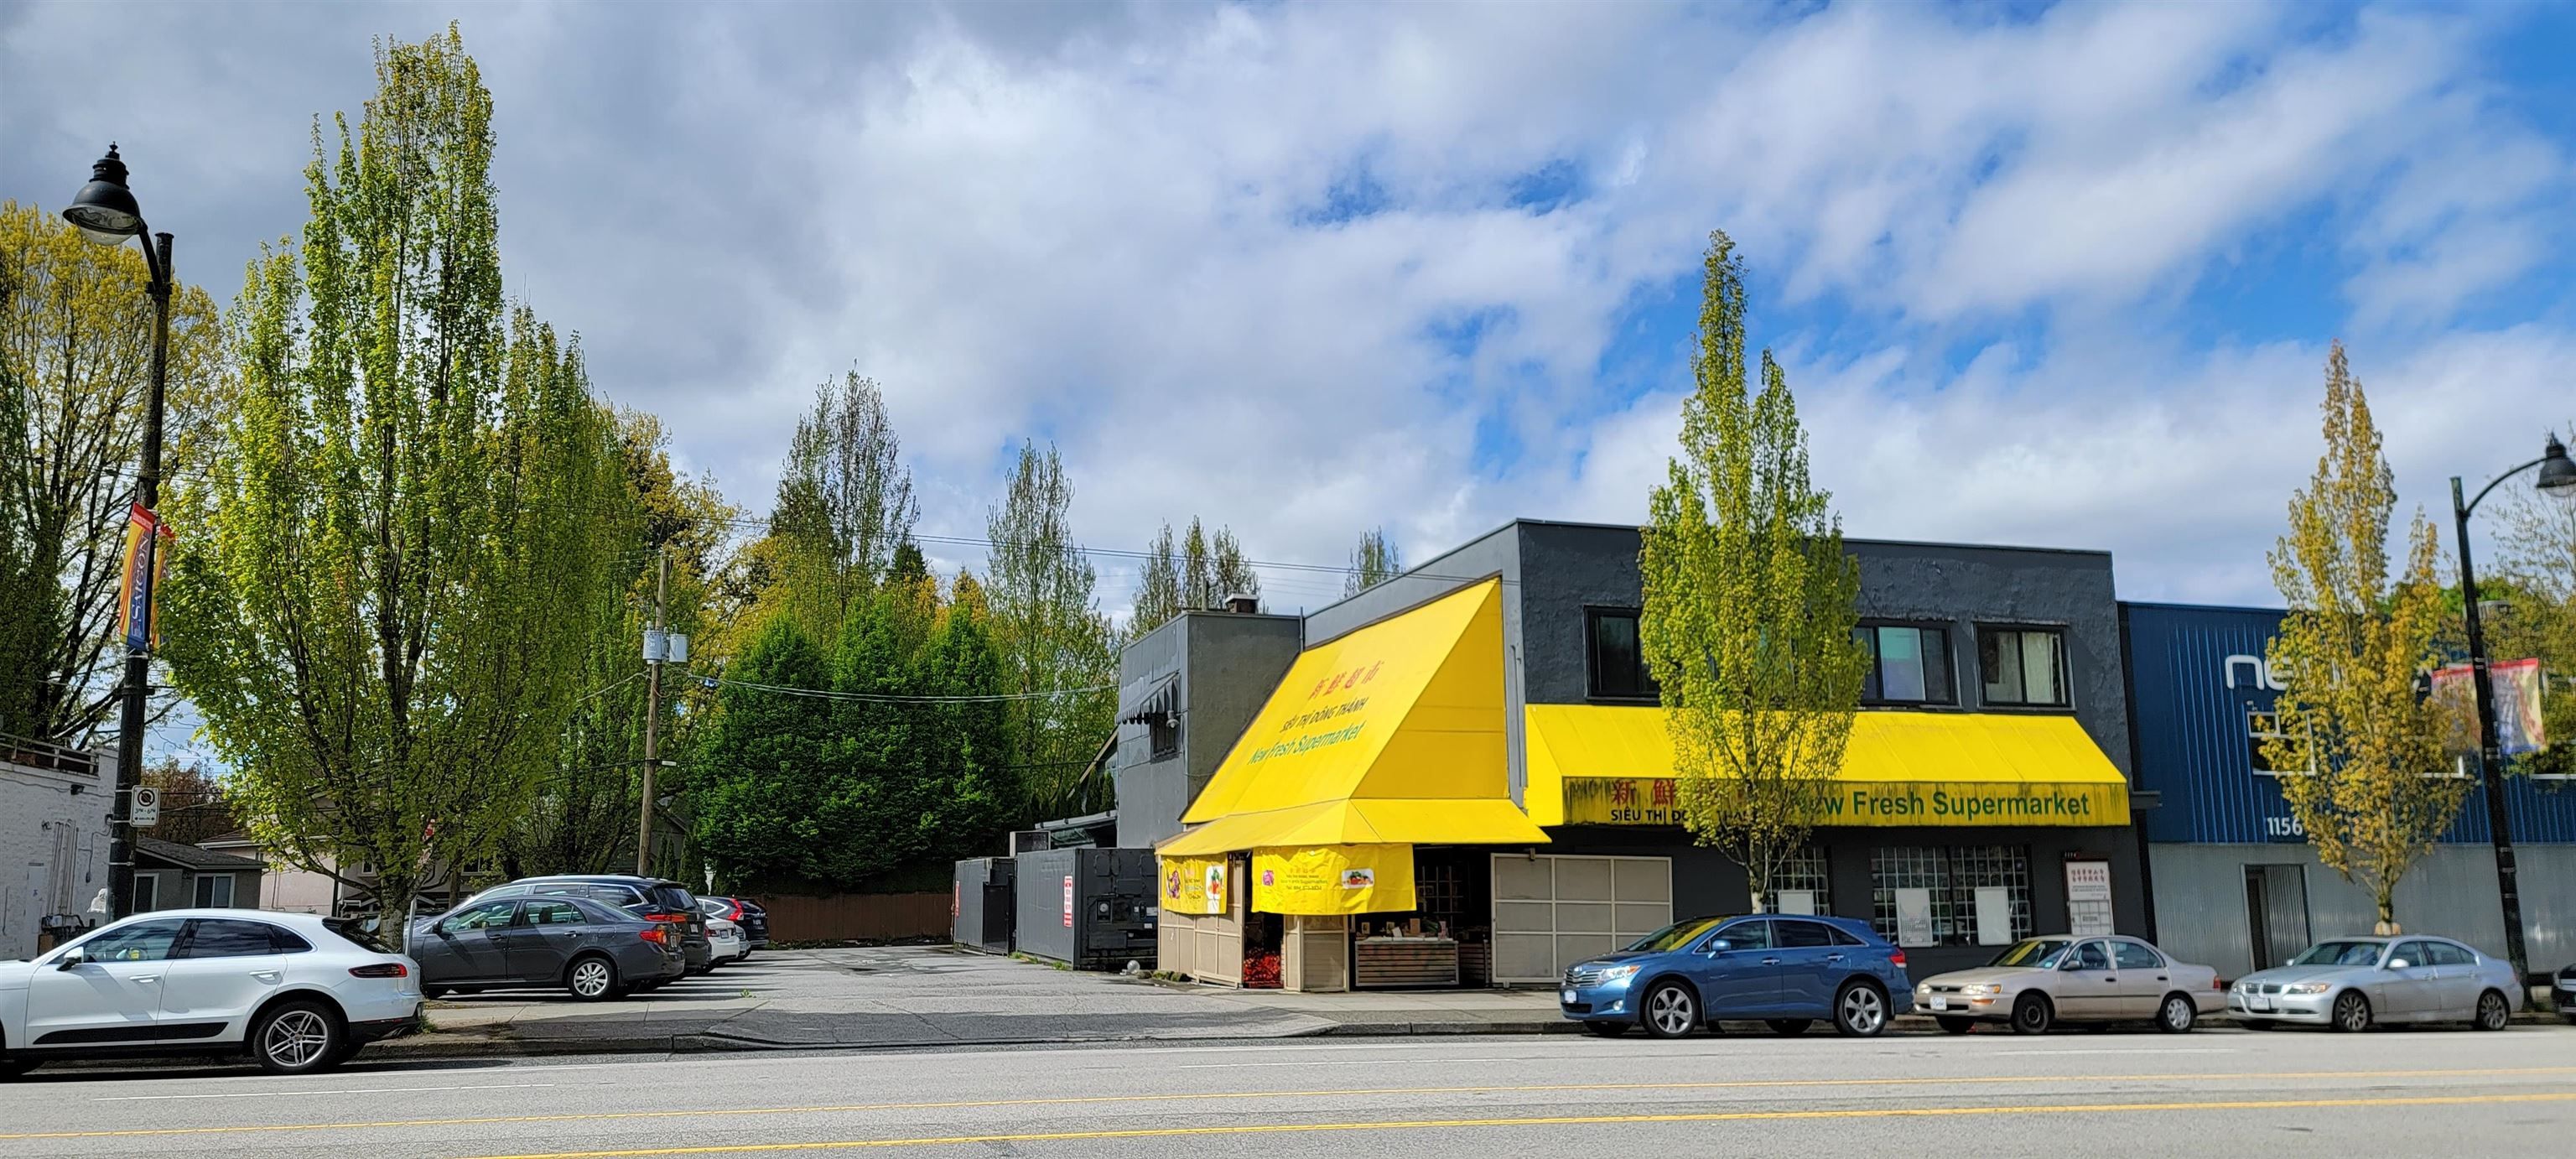 Main Photo: 1170-1174 KINGSWAY in Vancouver: Knight Land Commercial for sale (Vancouver East)  : MLS®# C8044316